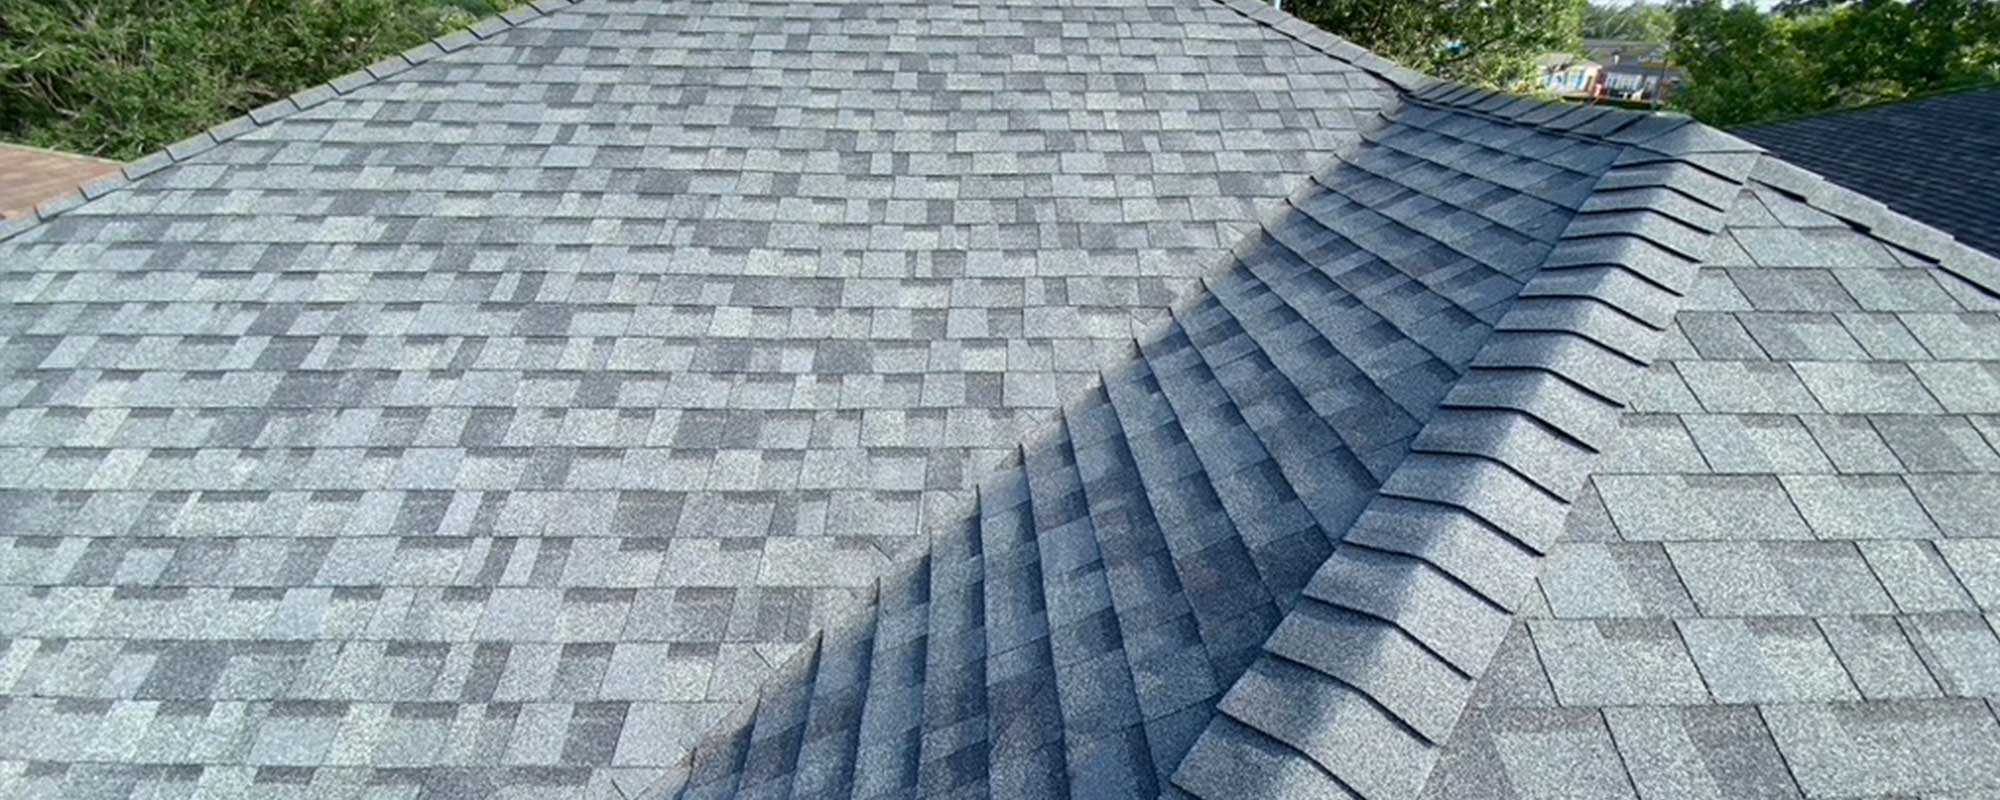 What to look for in a roofing estimate?